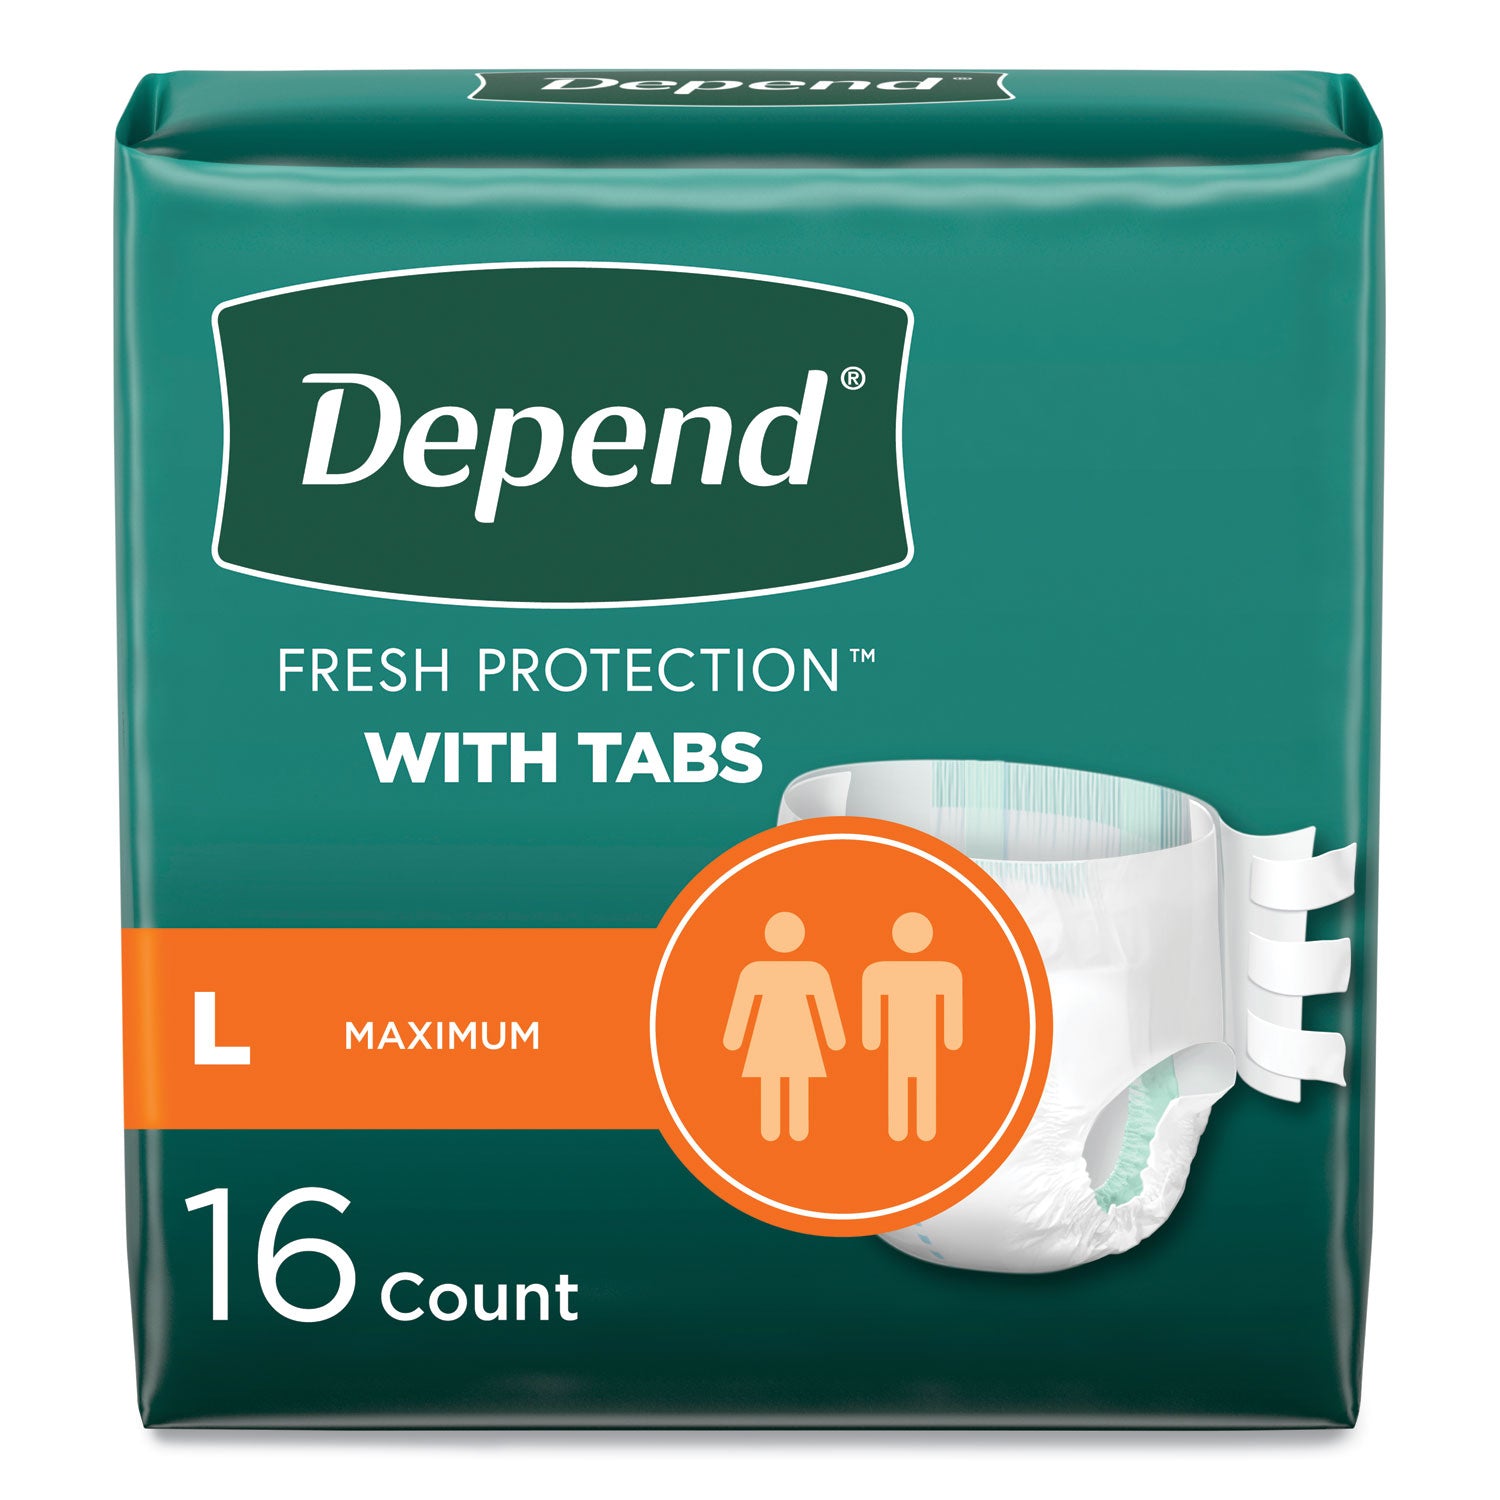 incontinence-protection-with-tabs-35-to-49-waist-16-pack-3-packs-carton_kcc35458 - 2